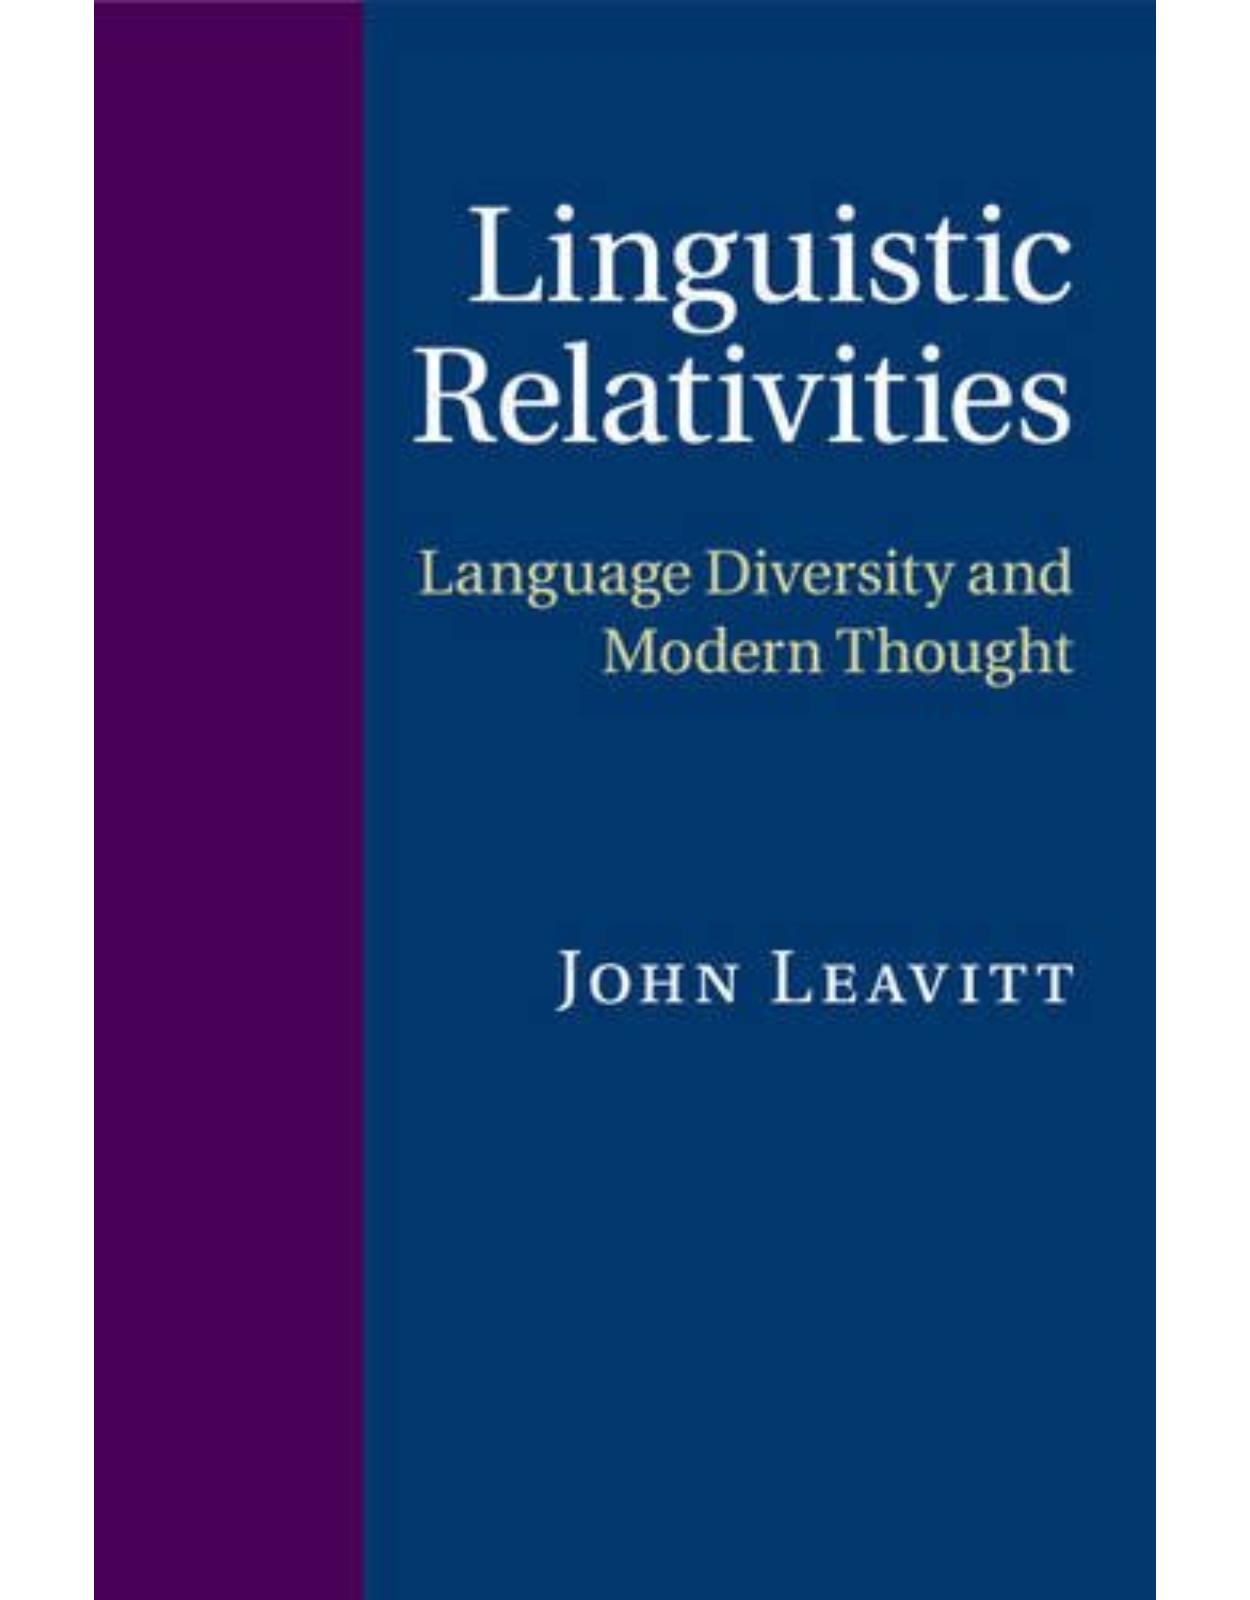 Linguistic Relativities: Language Diversity and Modern Thought